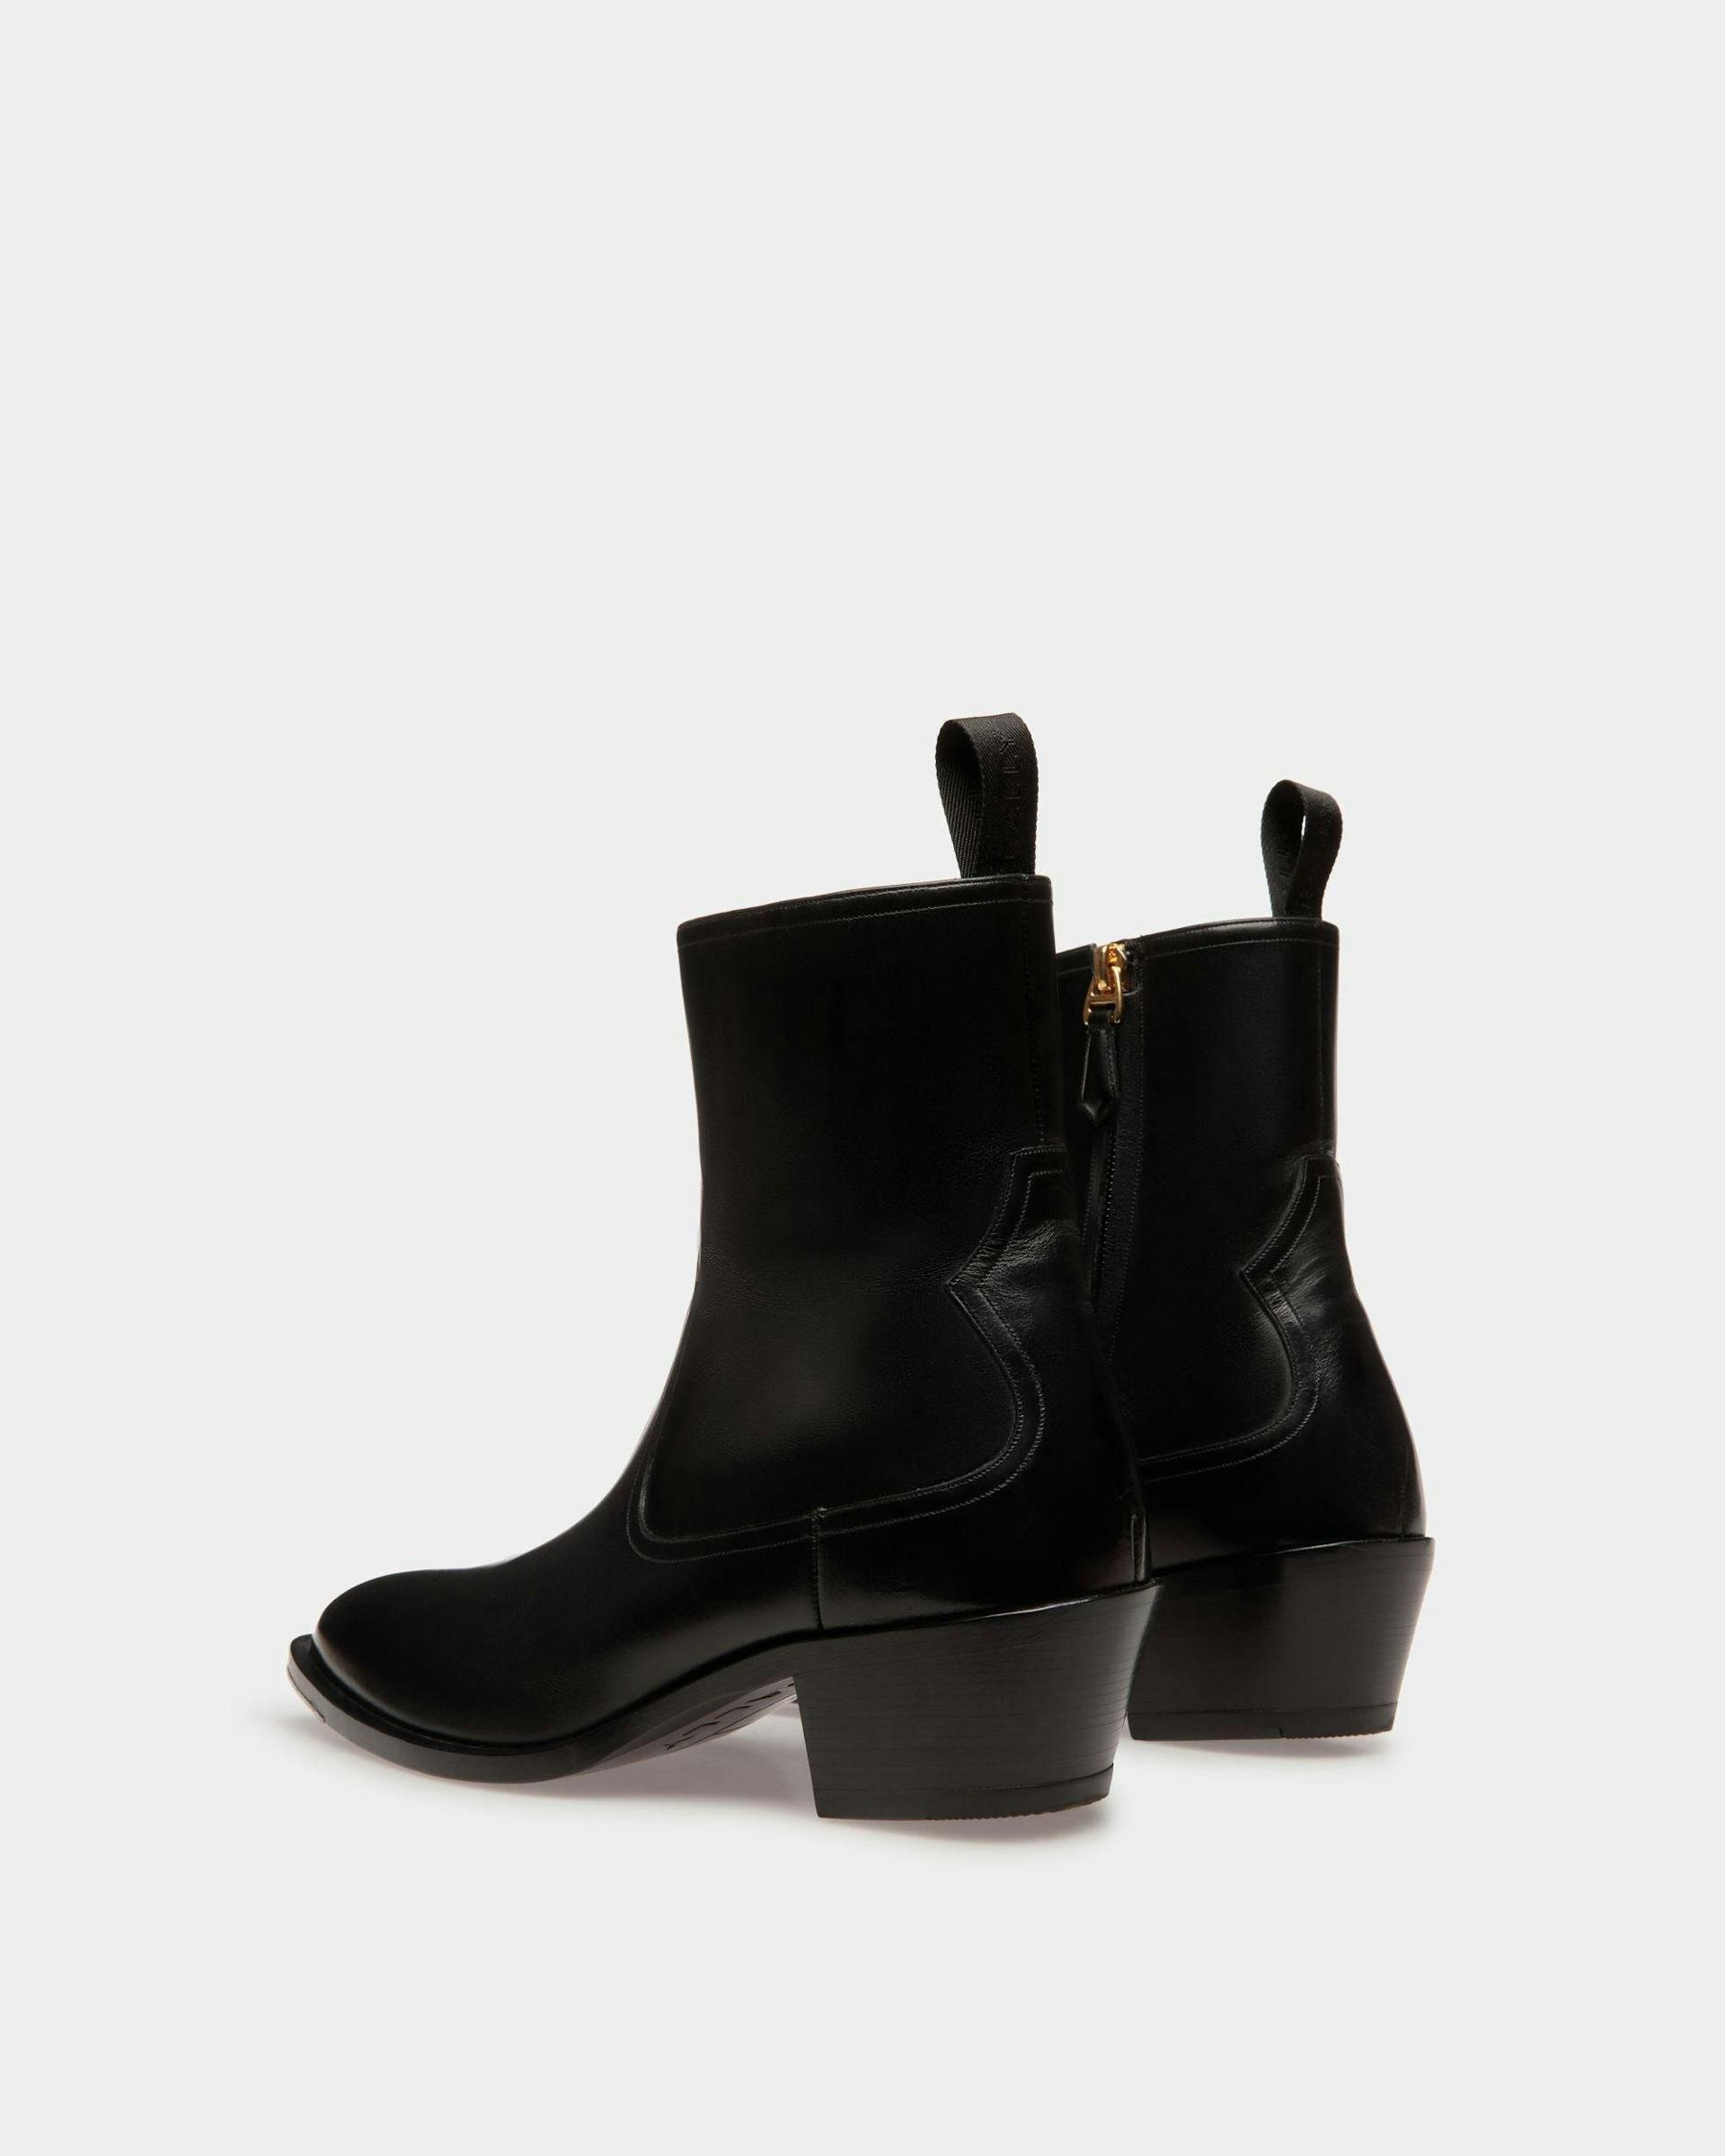 Vegas Boots In Black Leather - Women's - Bally - 04